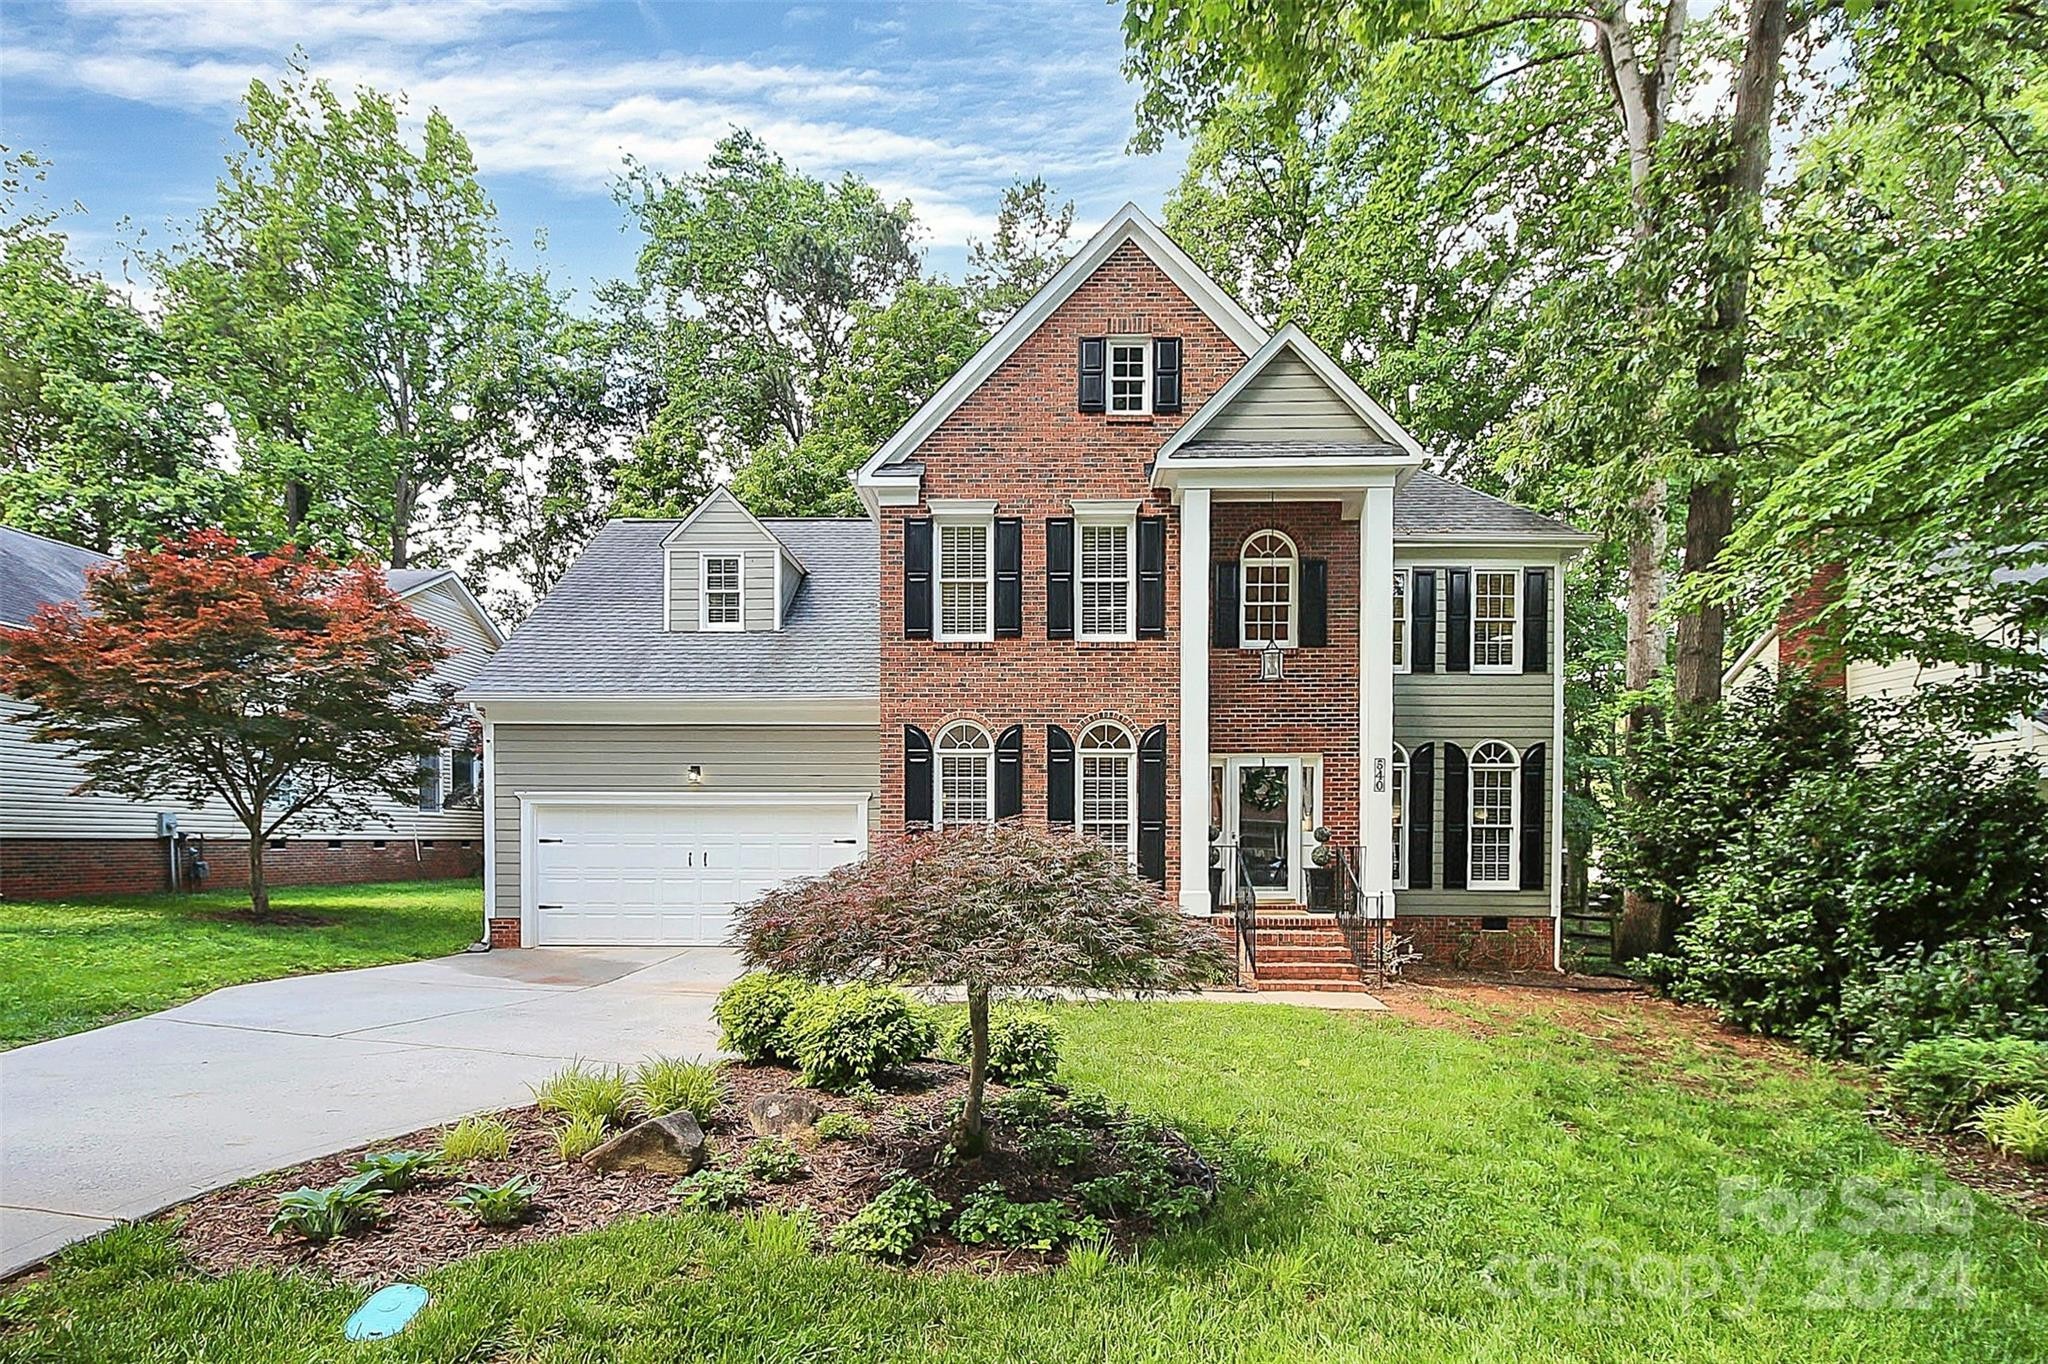 1. 540 Tysons Forest Drive